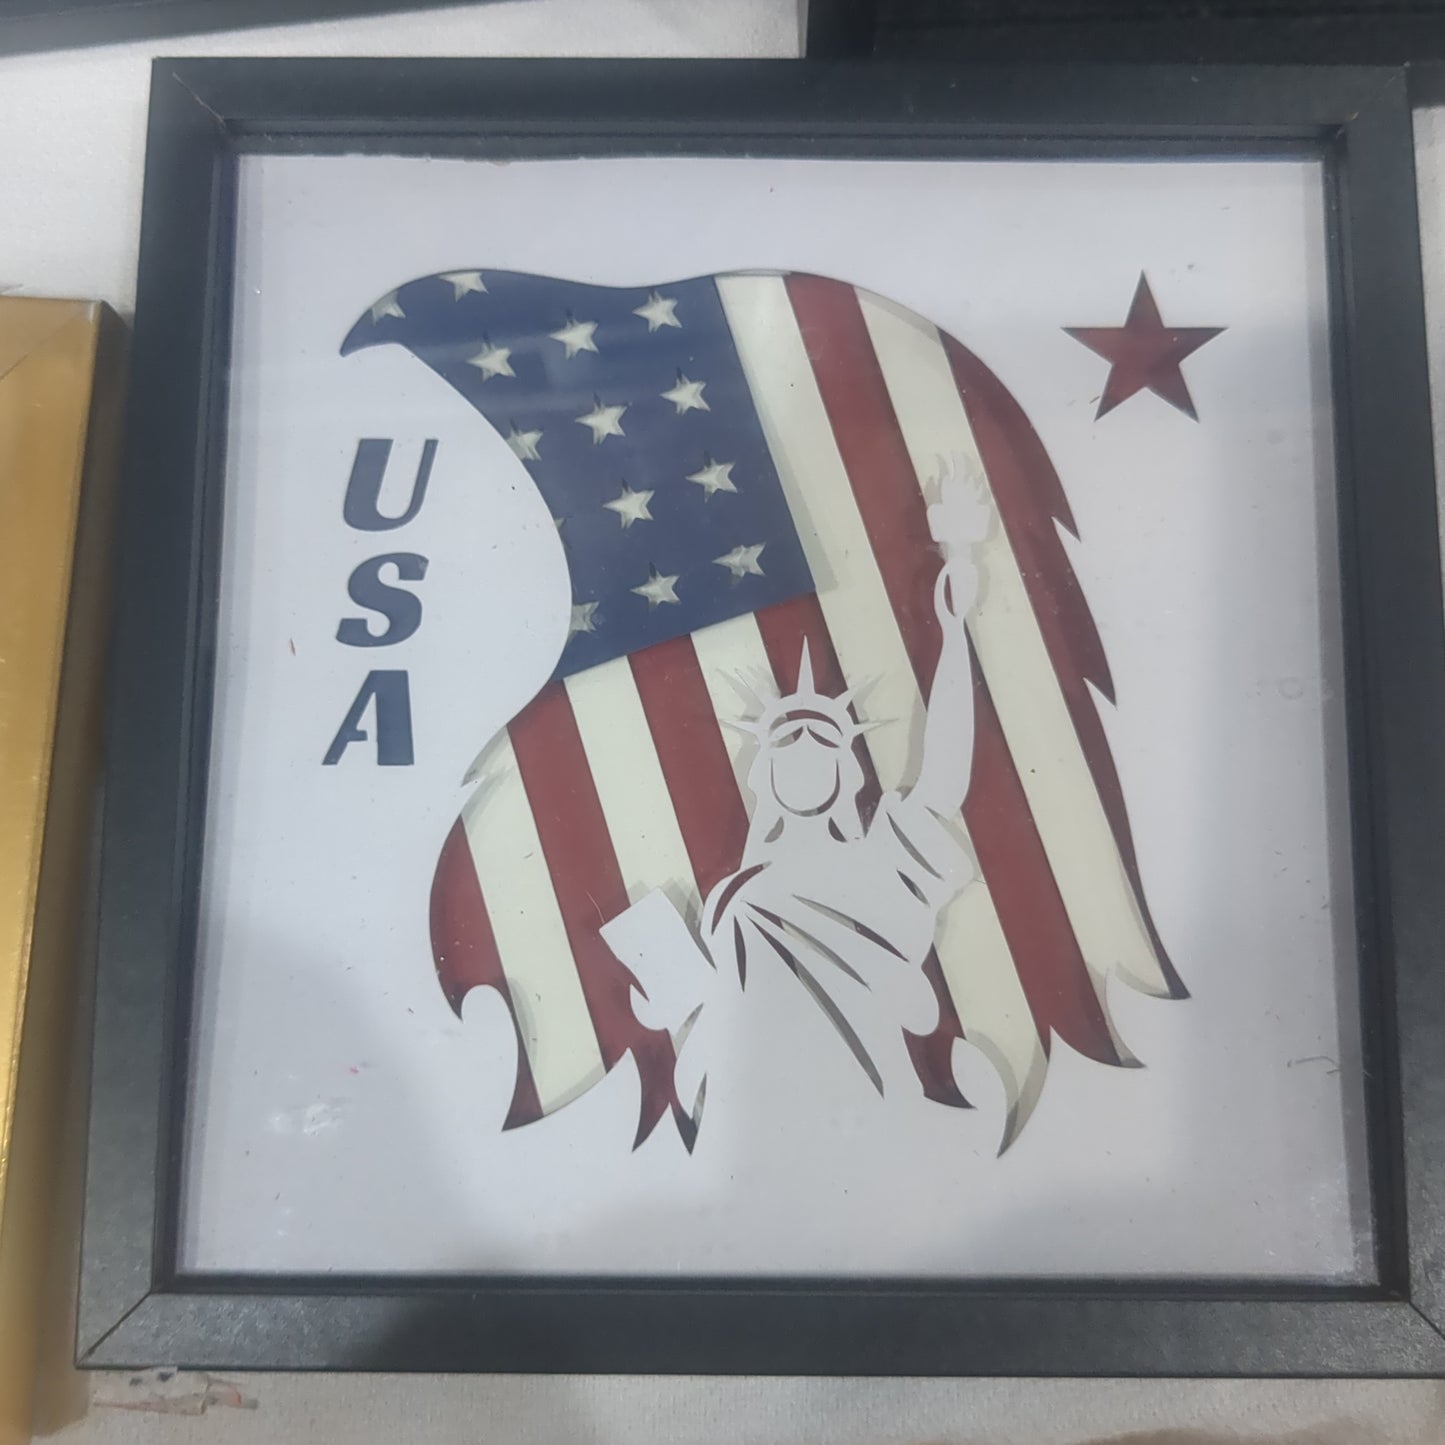 5 1/2” x 5 1/2” black shadow box with paper cut eagle Statue of Liberty and flag